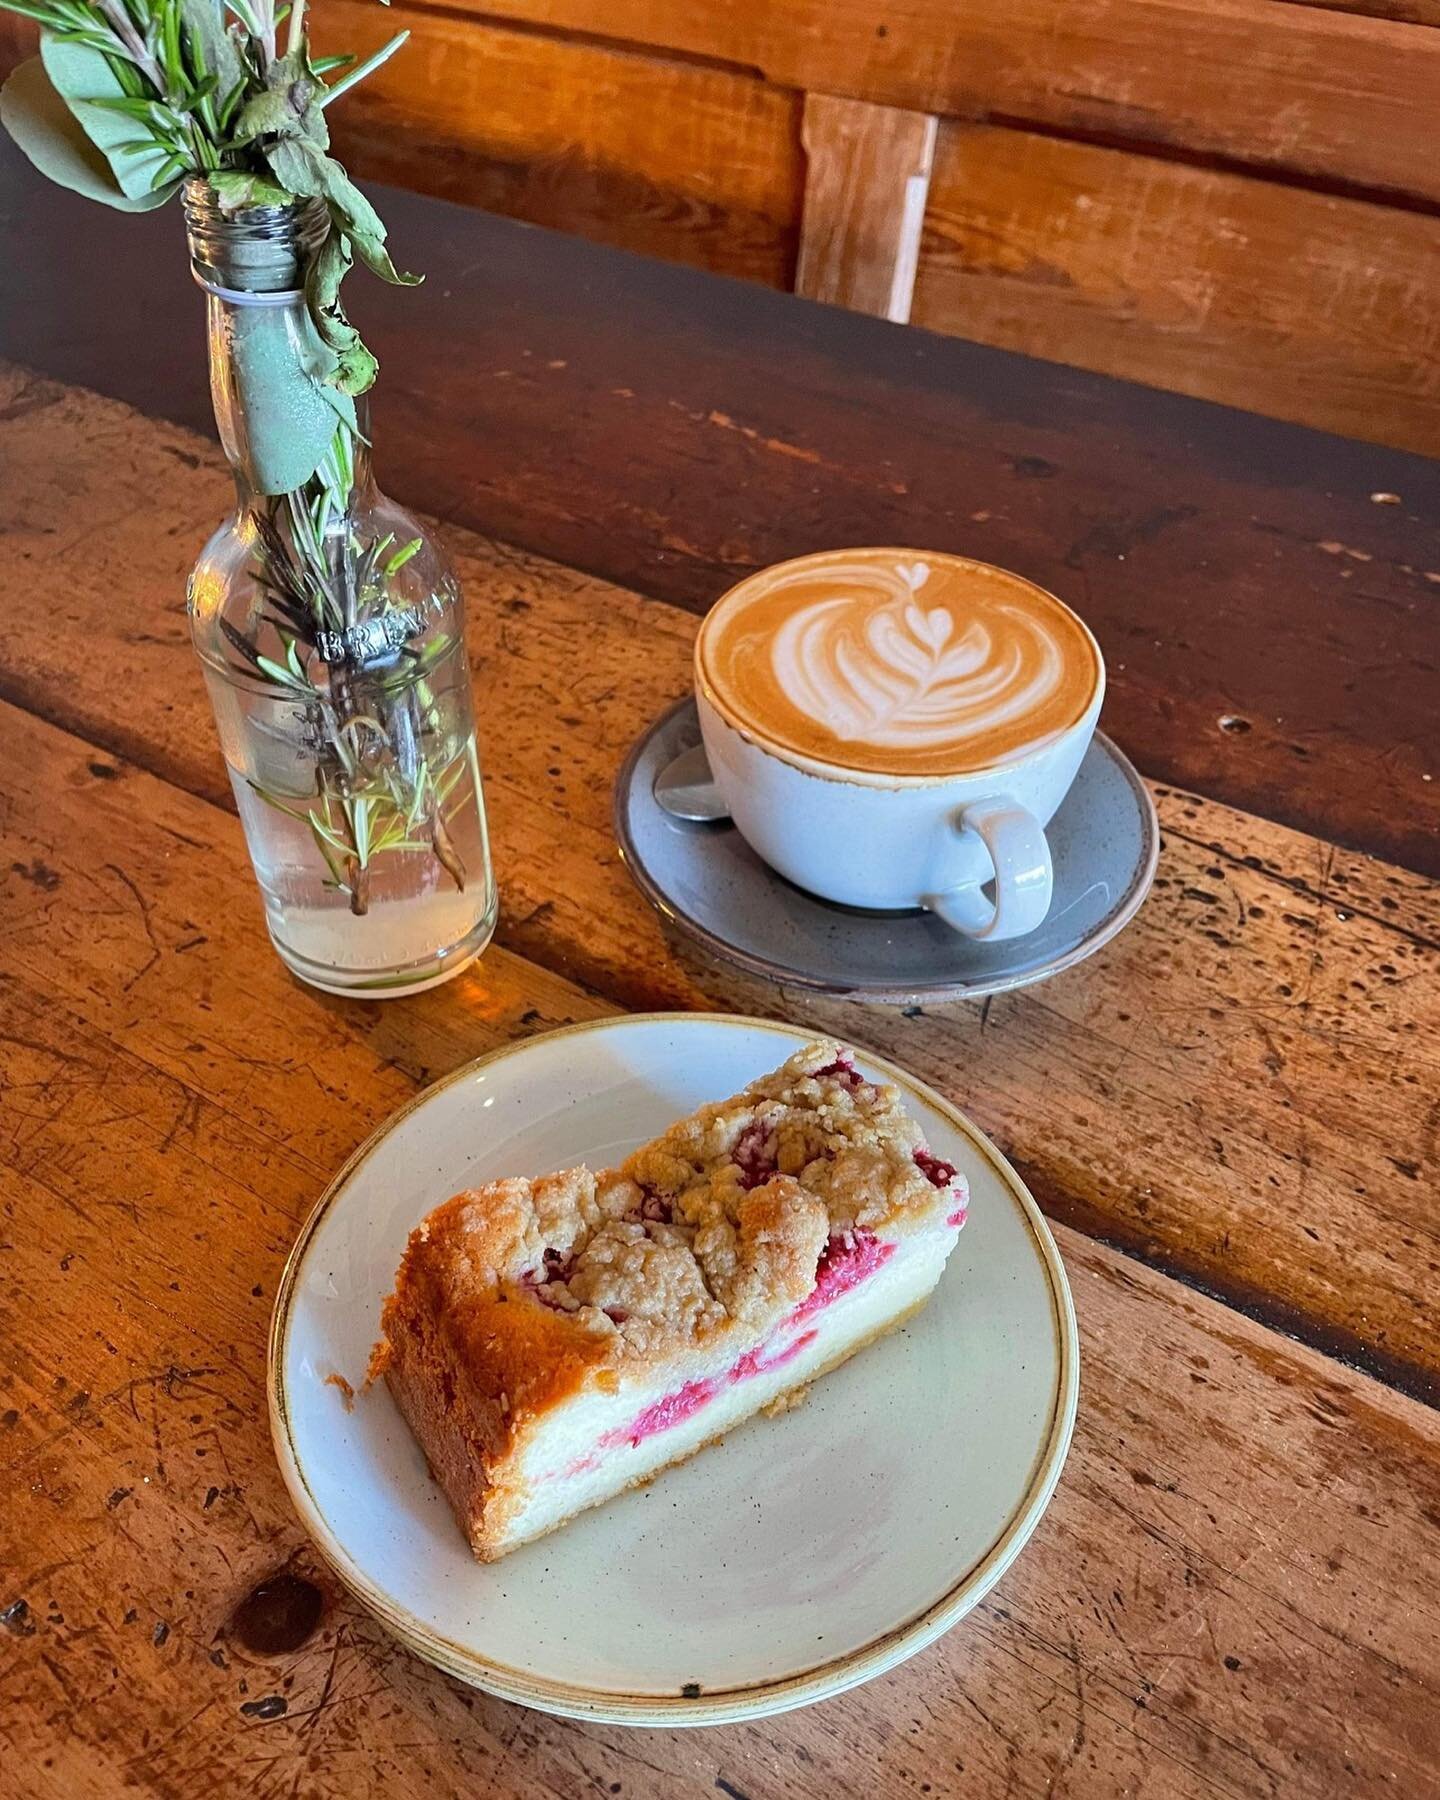 Raspberry and cardamom streusel cake on the counter today. Latte art by @macy.brownn 
Cafe open until 4, Chippy until 5 today #homemadecake #latteart #walescoastpath #fishandchips #coffeeforlife #beachcafe